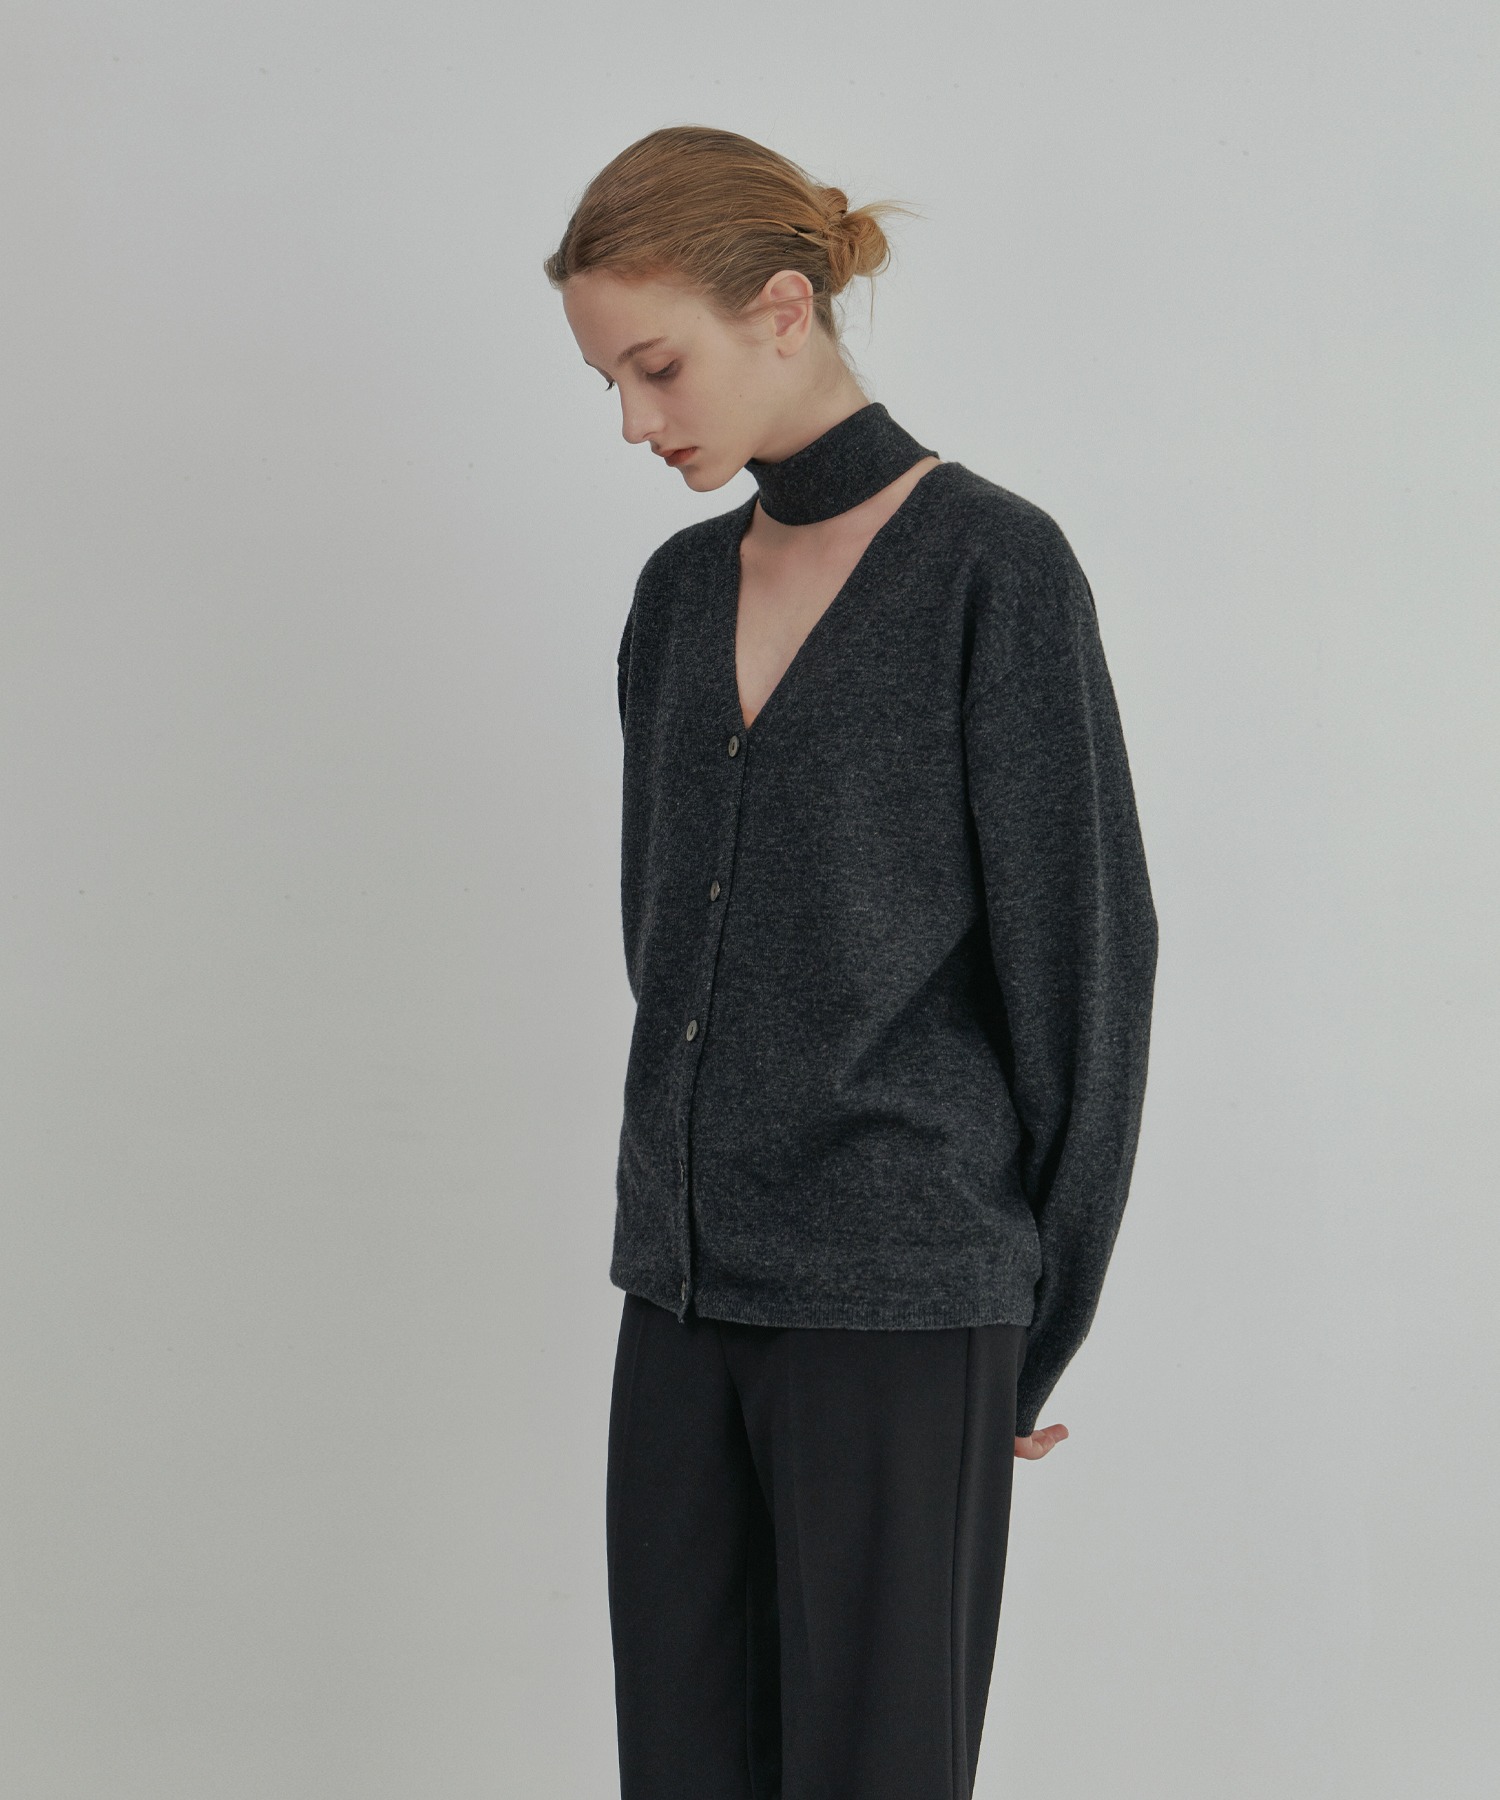 French Cashmere Cardigan (Charcoal)